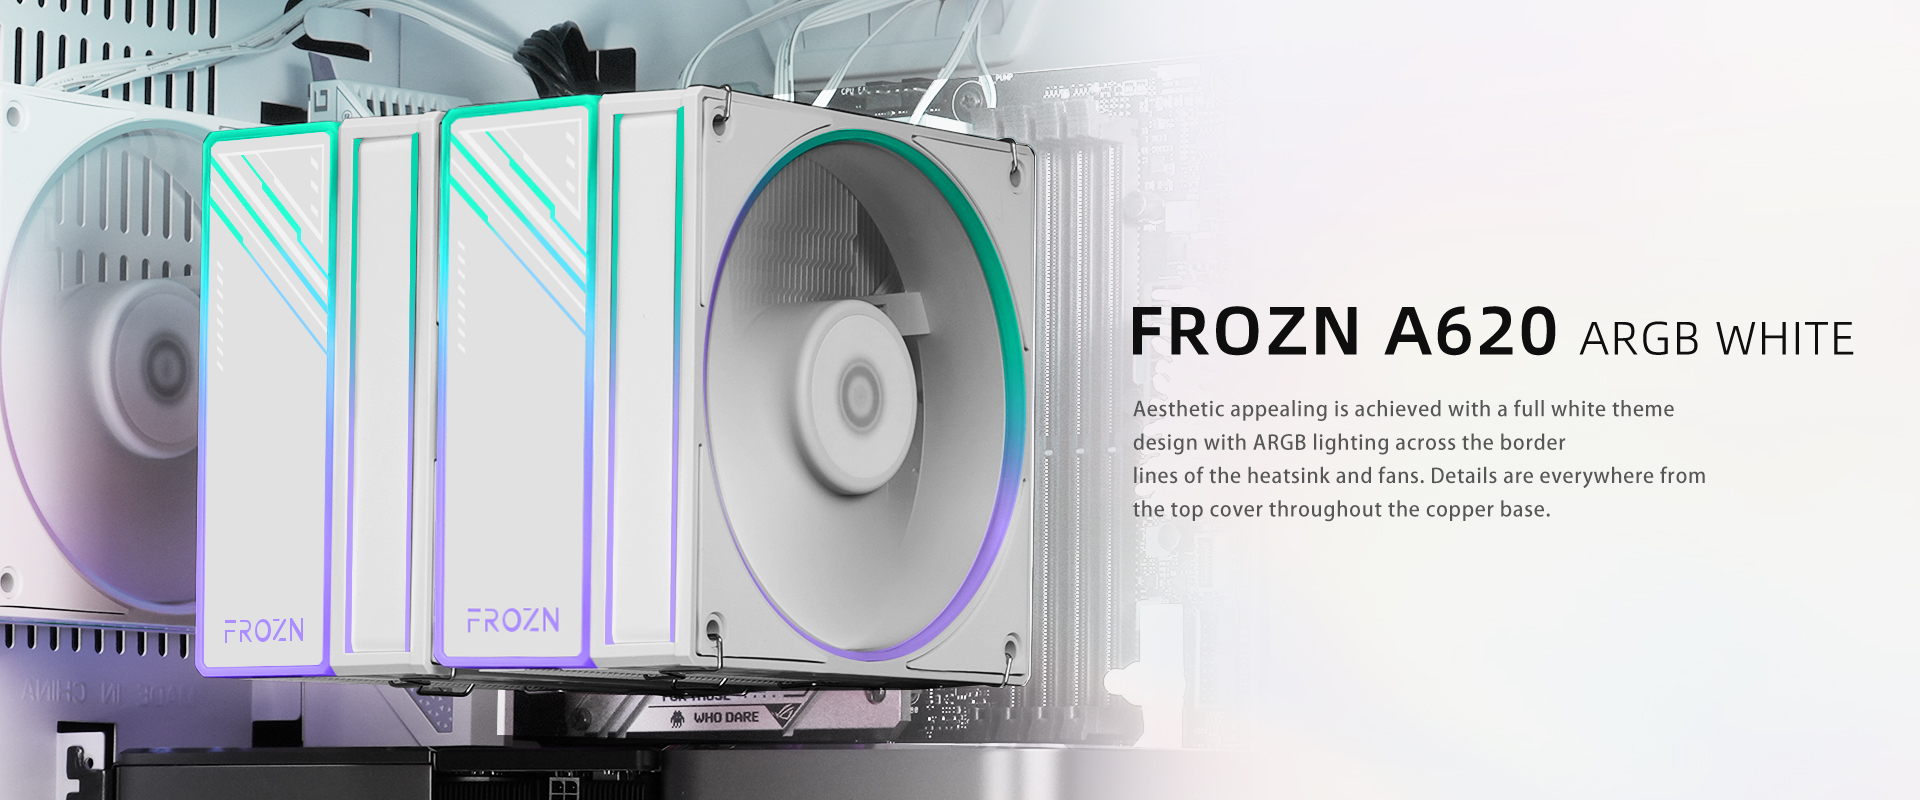 A large marketing image providing additional information about the product ID-COOLING FROZN A620 ARGB CPU Cooler - White - Additional alt info not provided